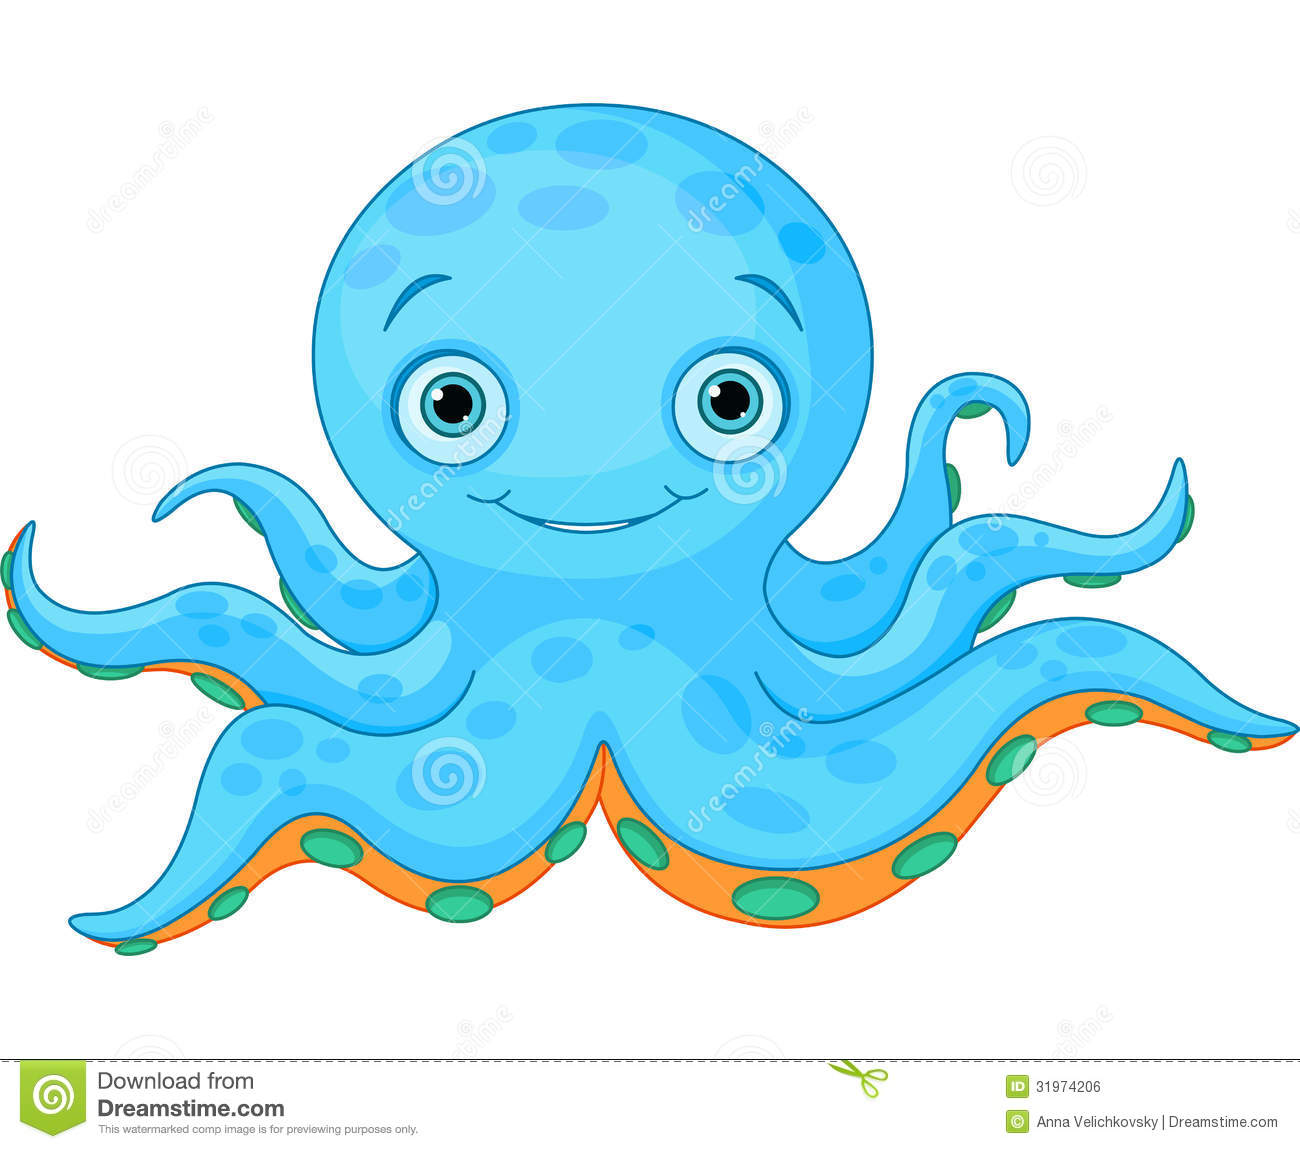 Royalty Free Stock Image  Cute Octopus